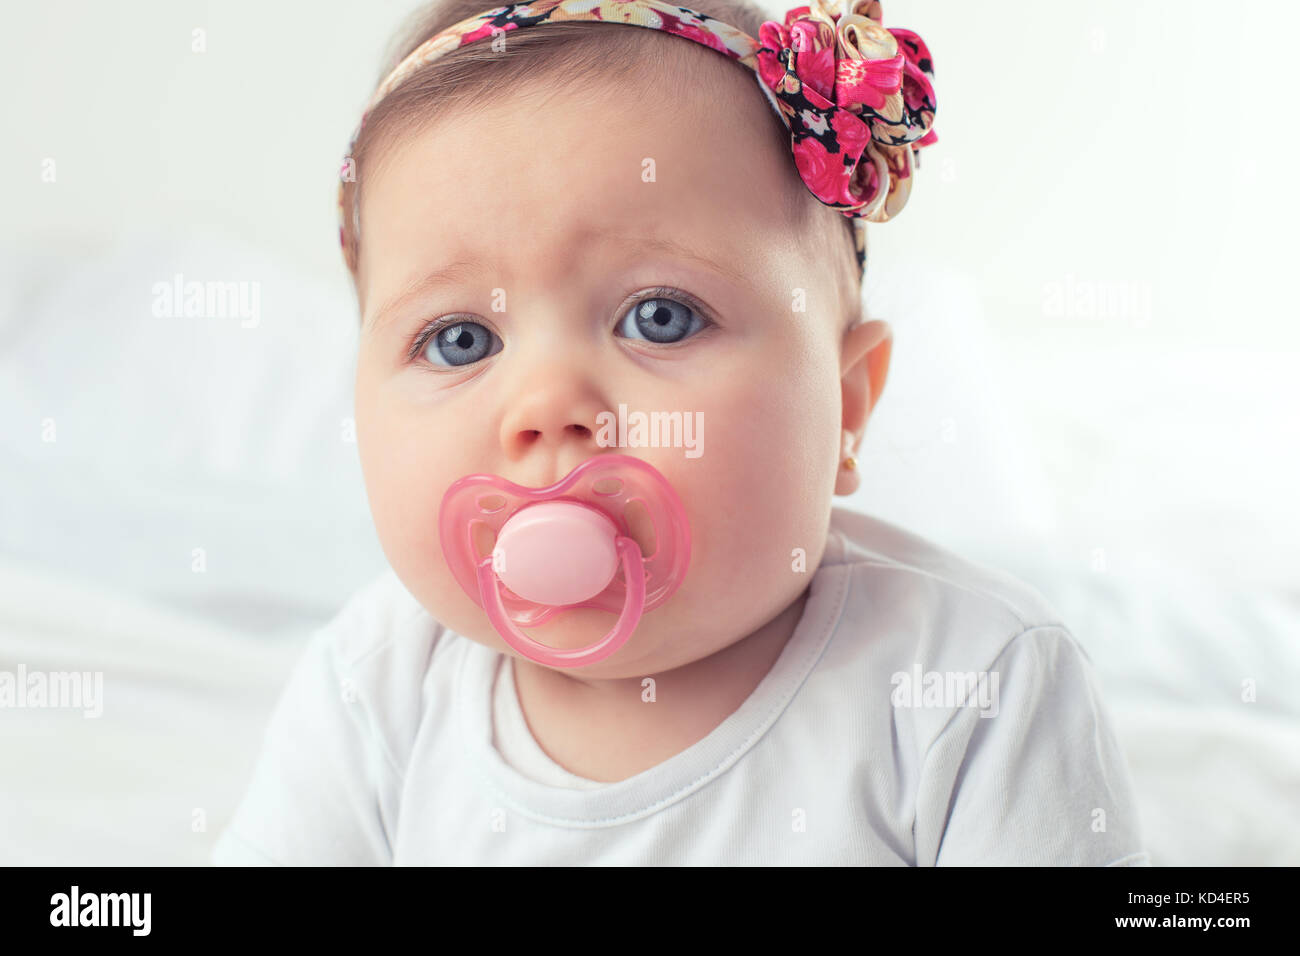 Adorable baby girl portrait on white background Stock Photo